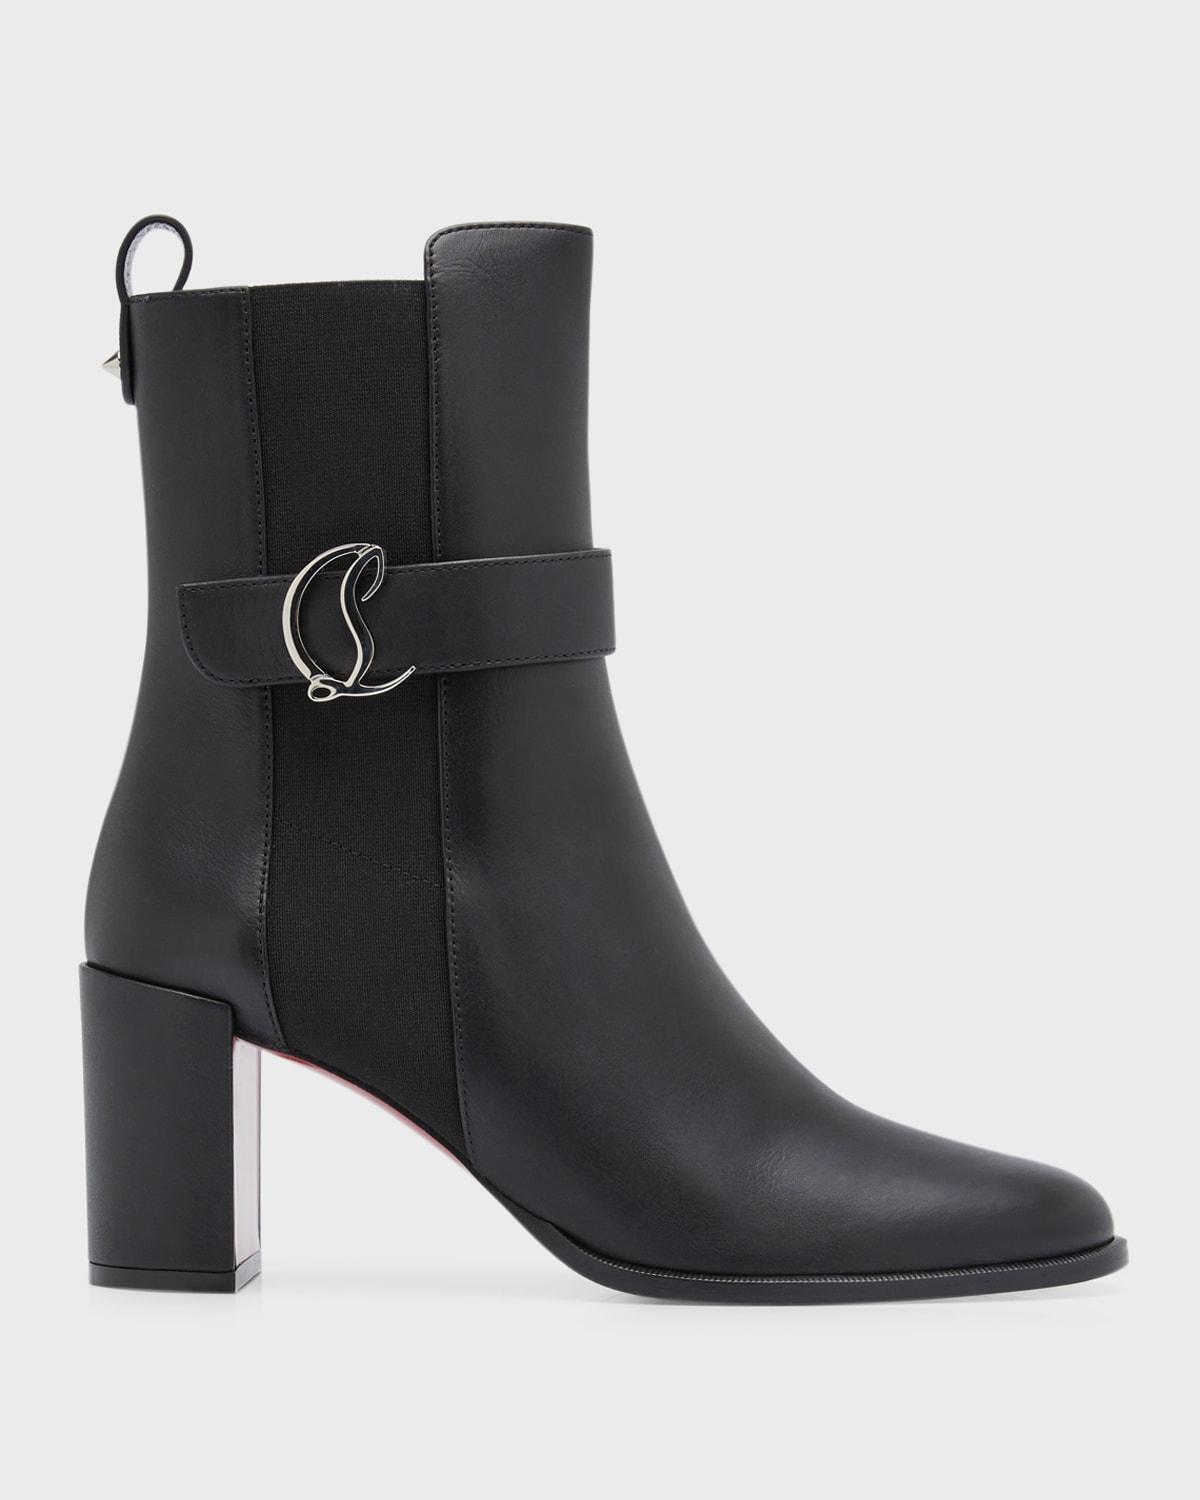 Christian Louboutin CL Monogram Chelsea Bootie Product Image